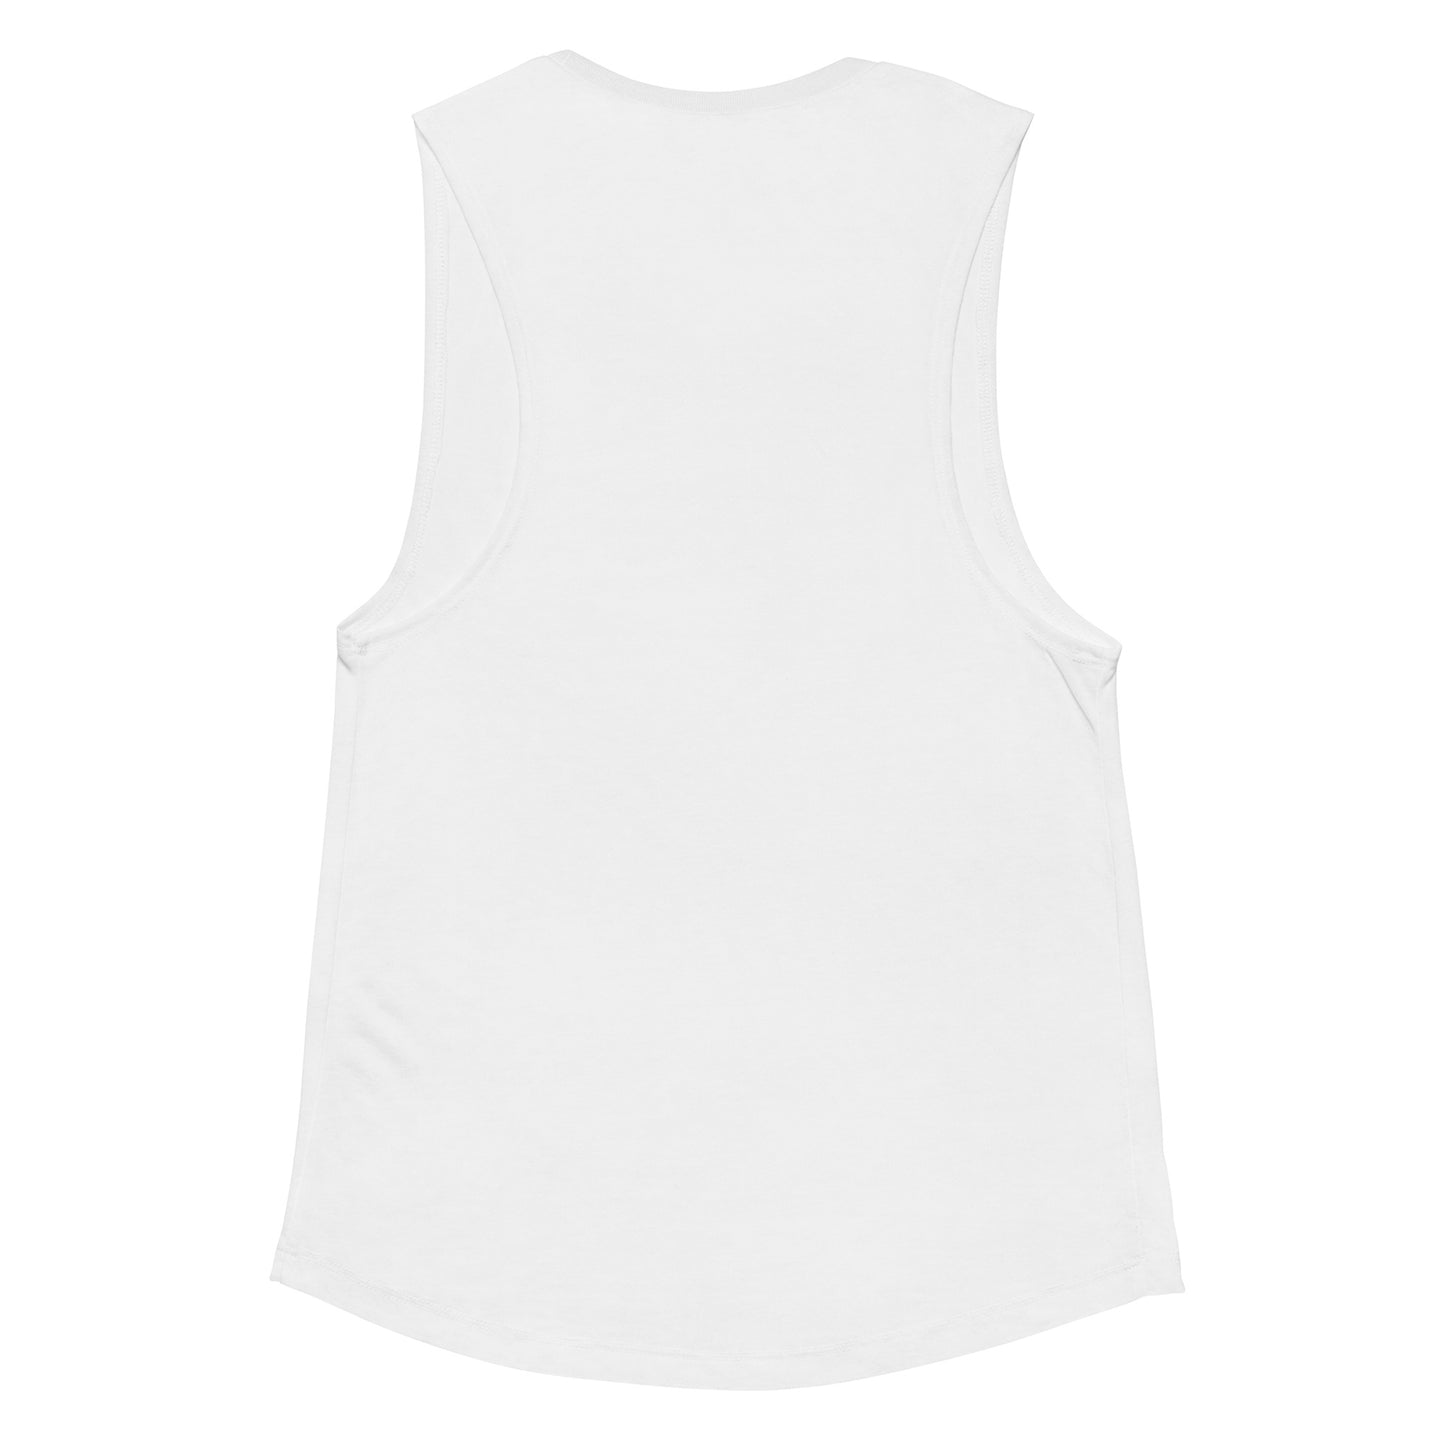 Respect Ladies’ Muscle Tank